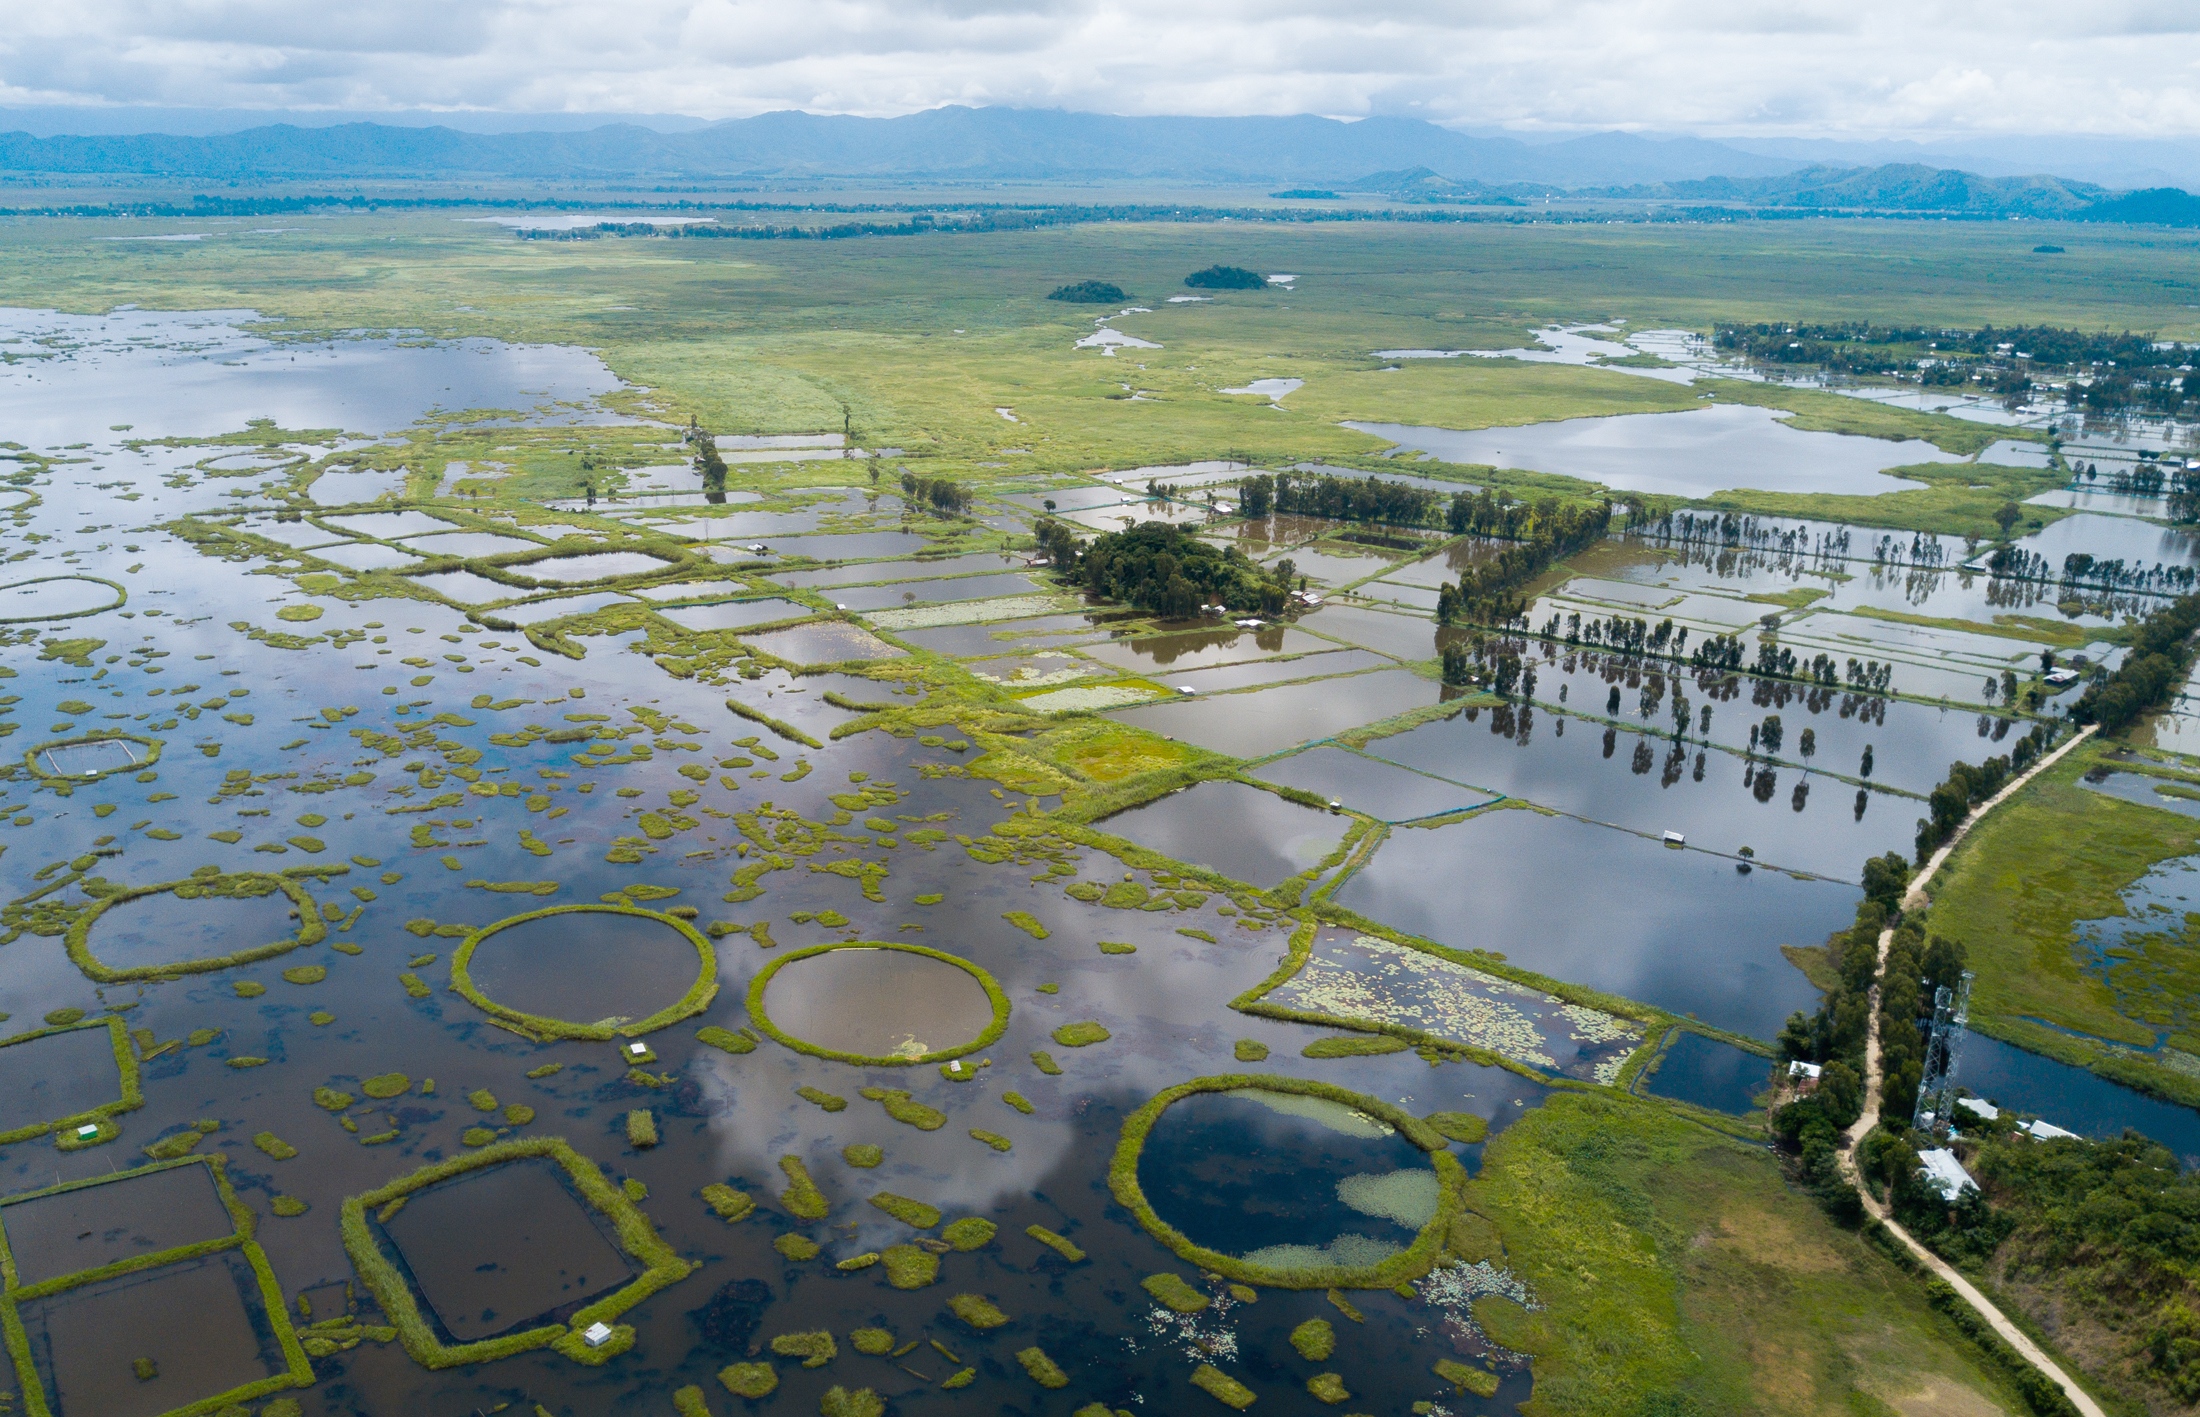  A view of the areas around Loktak Lake that are inundated by floodwaters. 